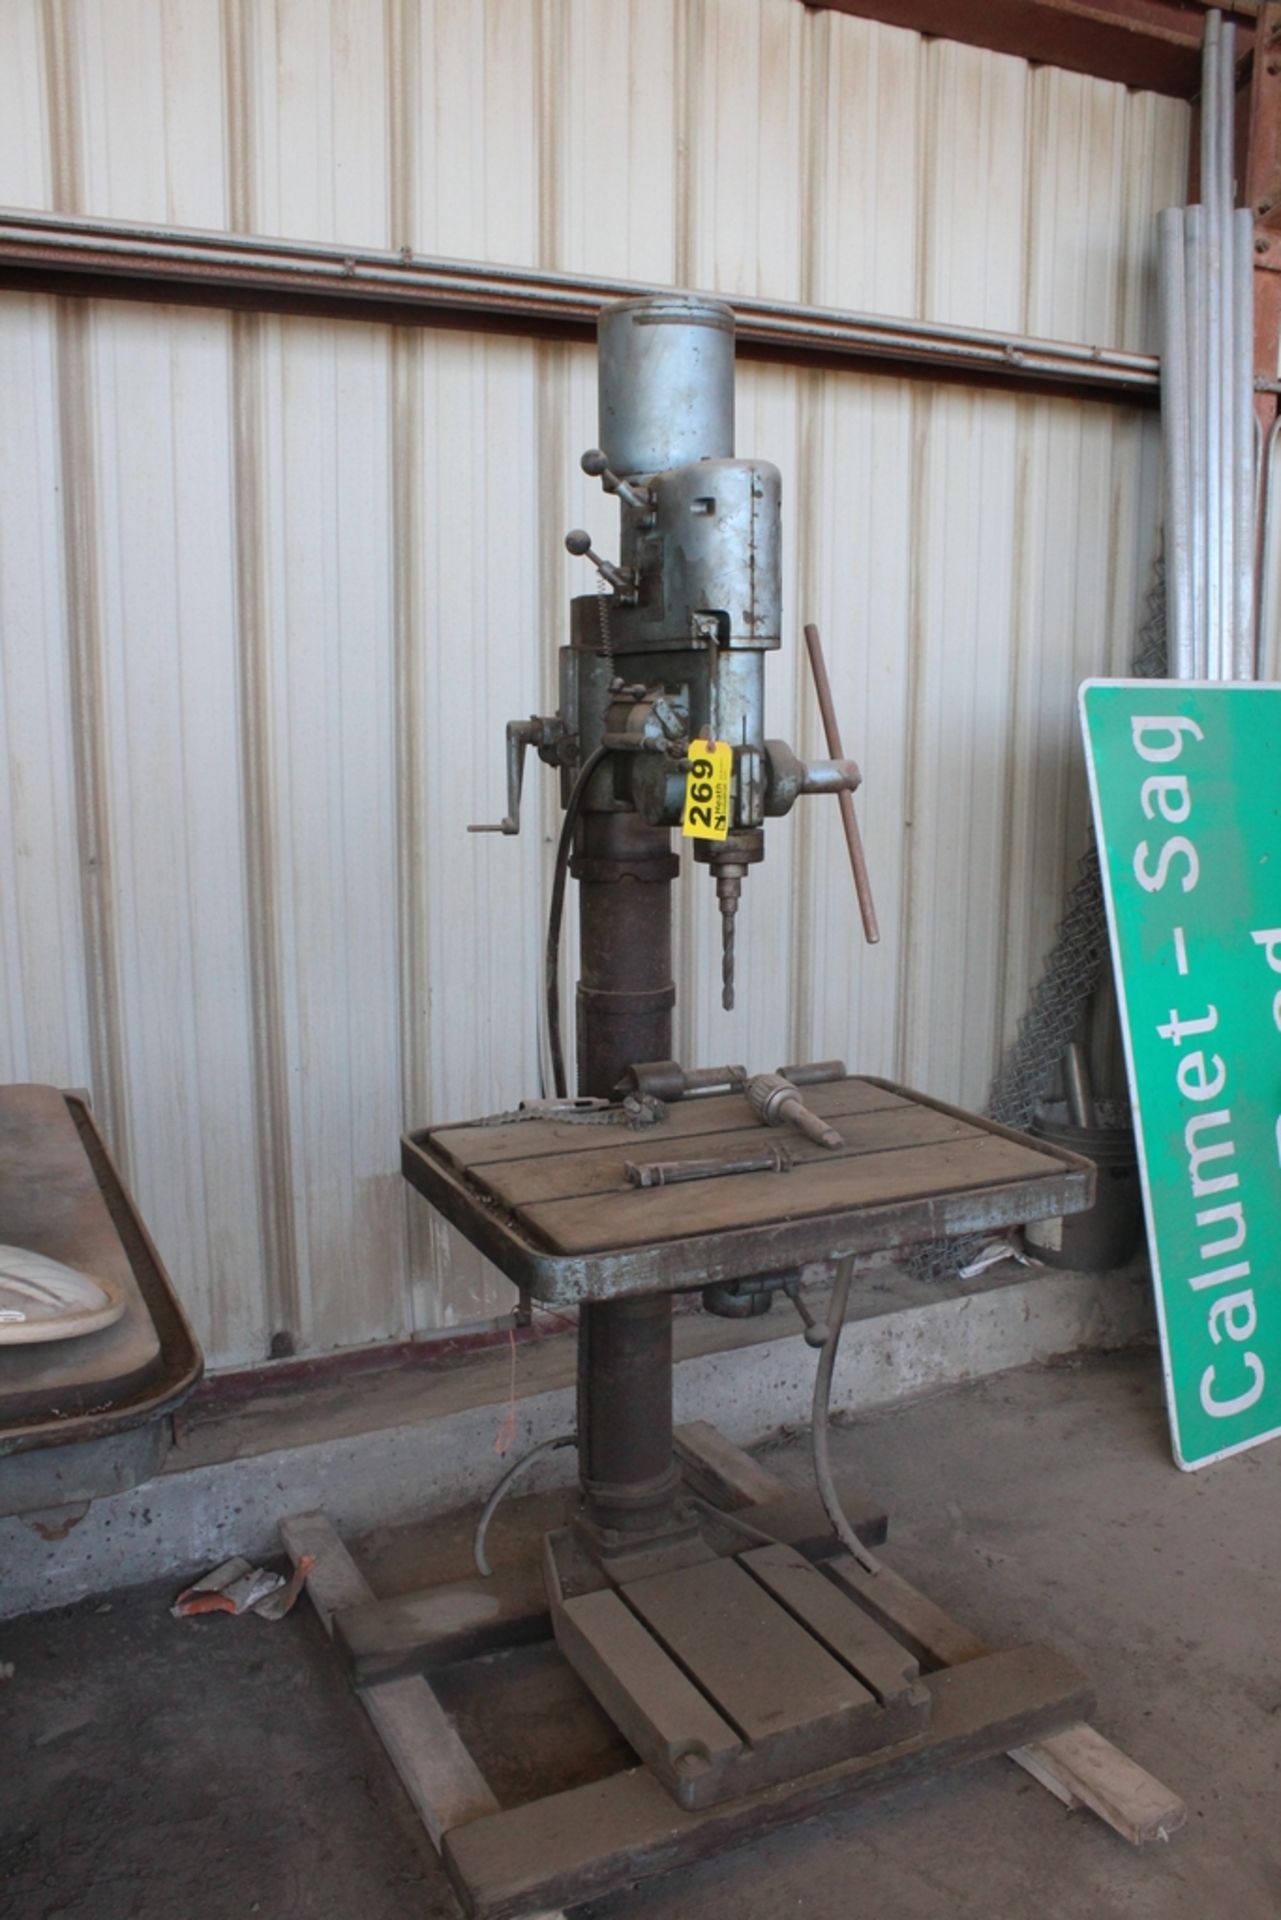 AB ARBOGA MASKINER TYPE 830 DRILL PRESS, RPM 80-890, 12" THROAT, 32" X 24" TABLE, NO. 87259